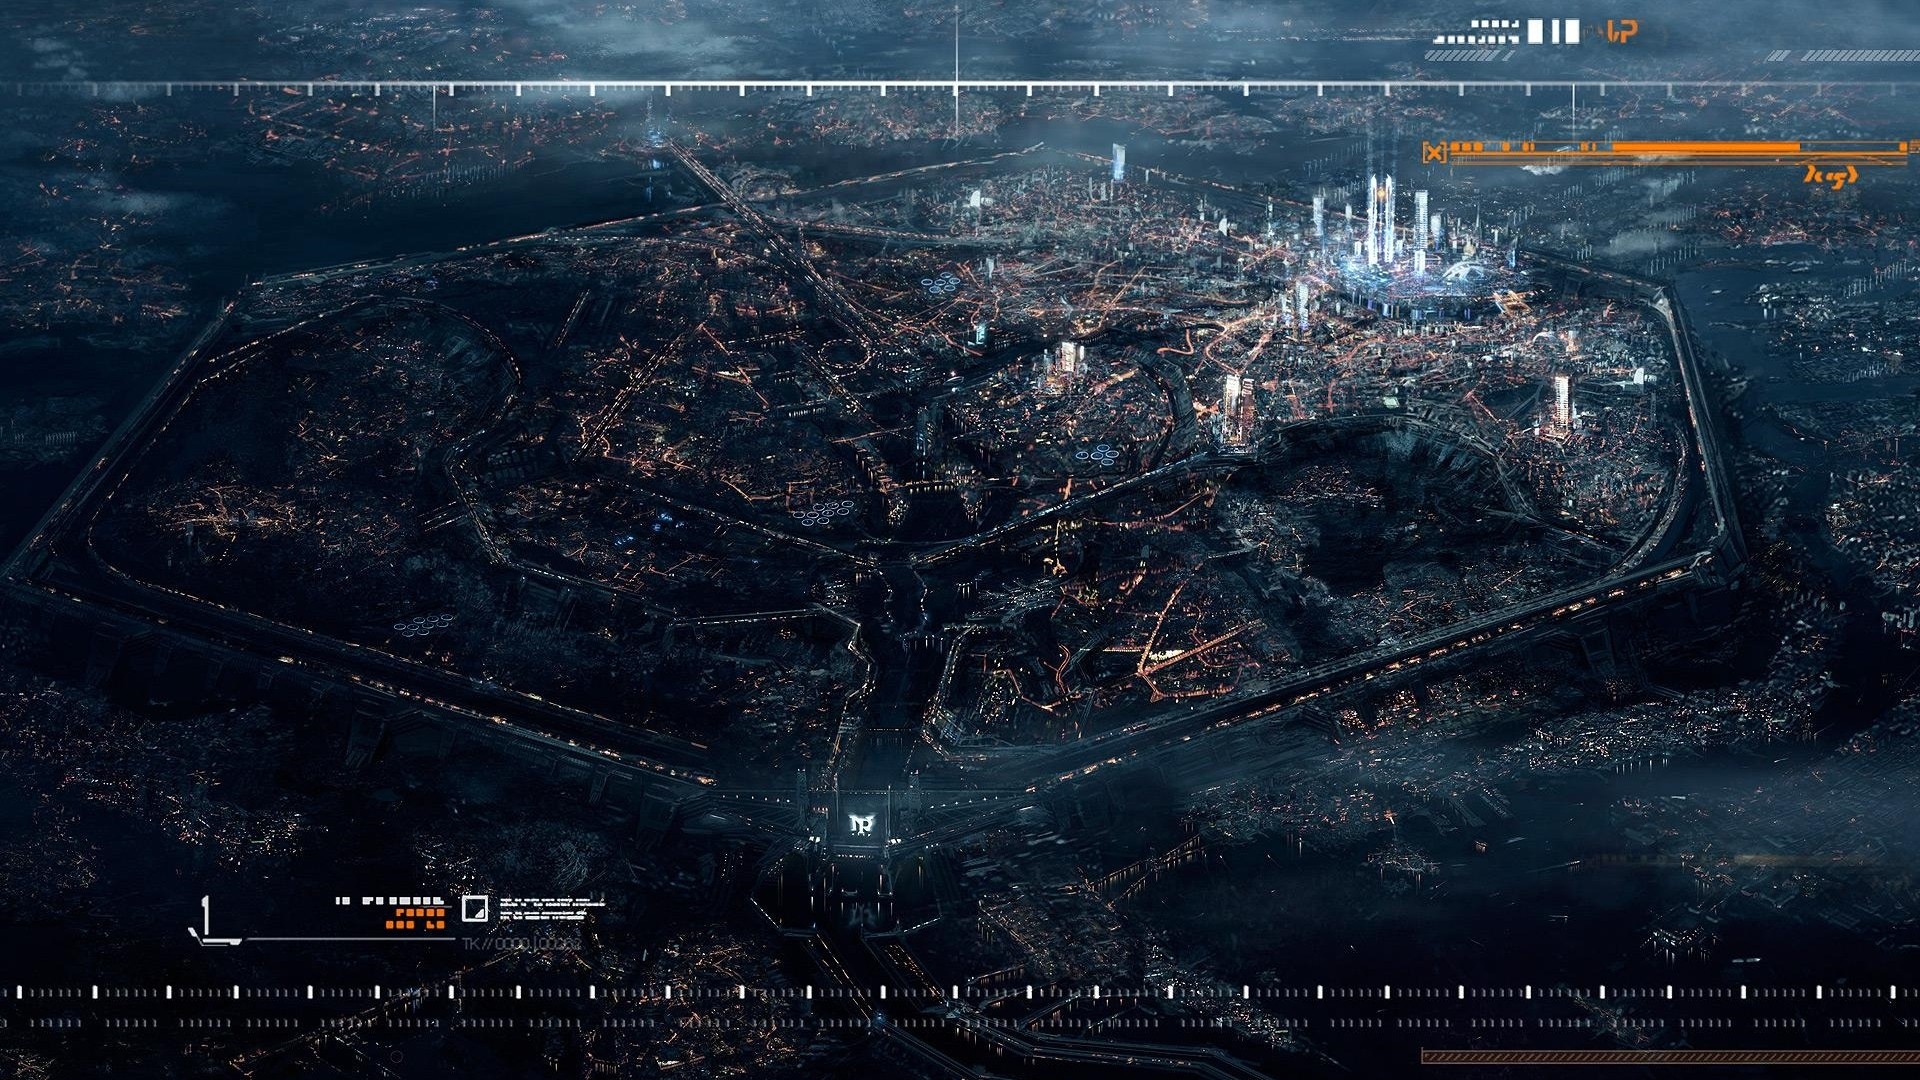 From Above Wallpaper, Future City From Above Iphone - Science Fiction City Map - HD Wallpaper 